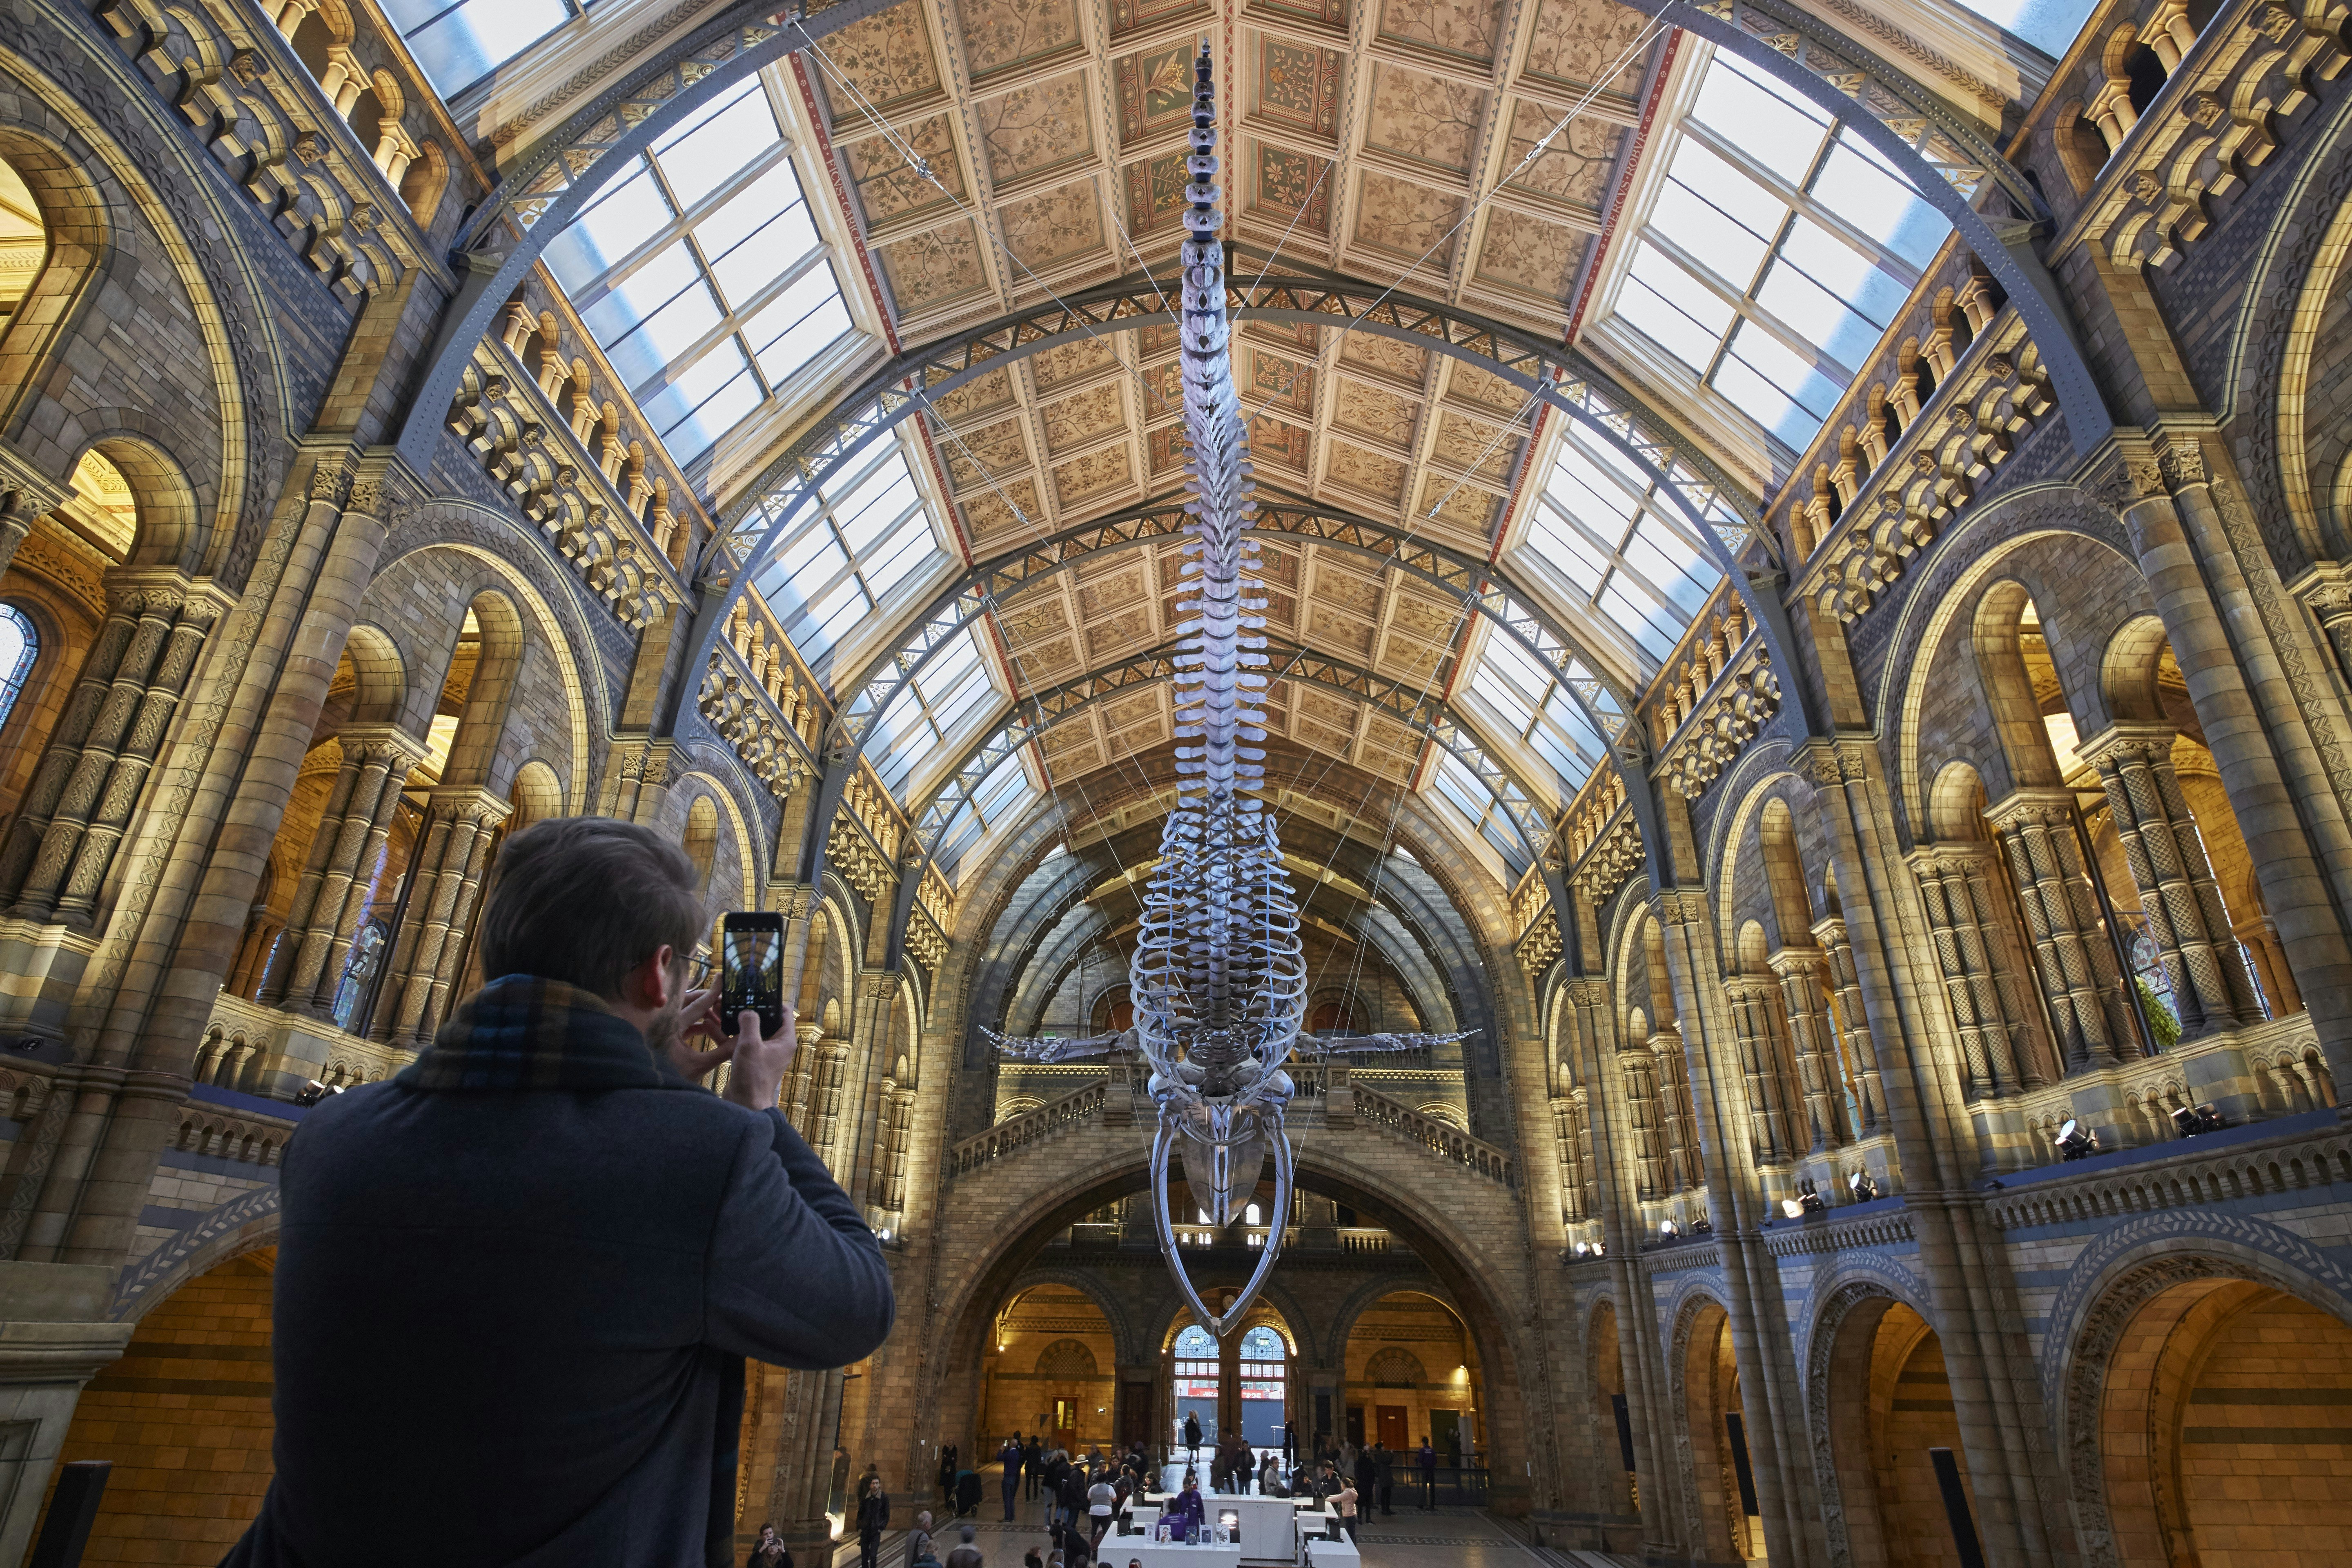 A visitor at the Natural History Museum, taking a picture of the blue whale skeleton in Hintze Hall